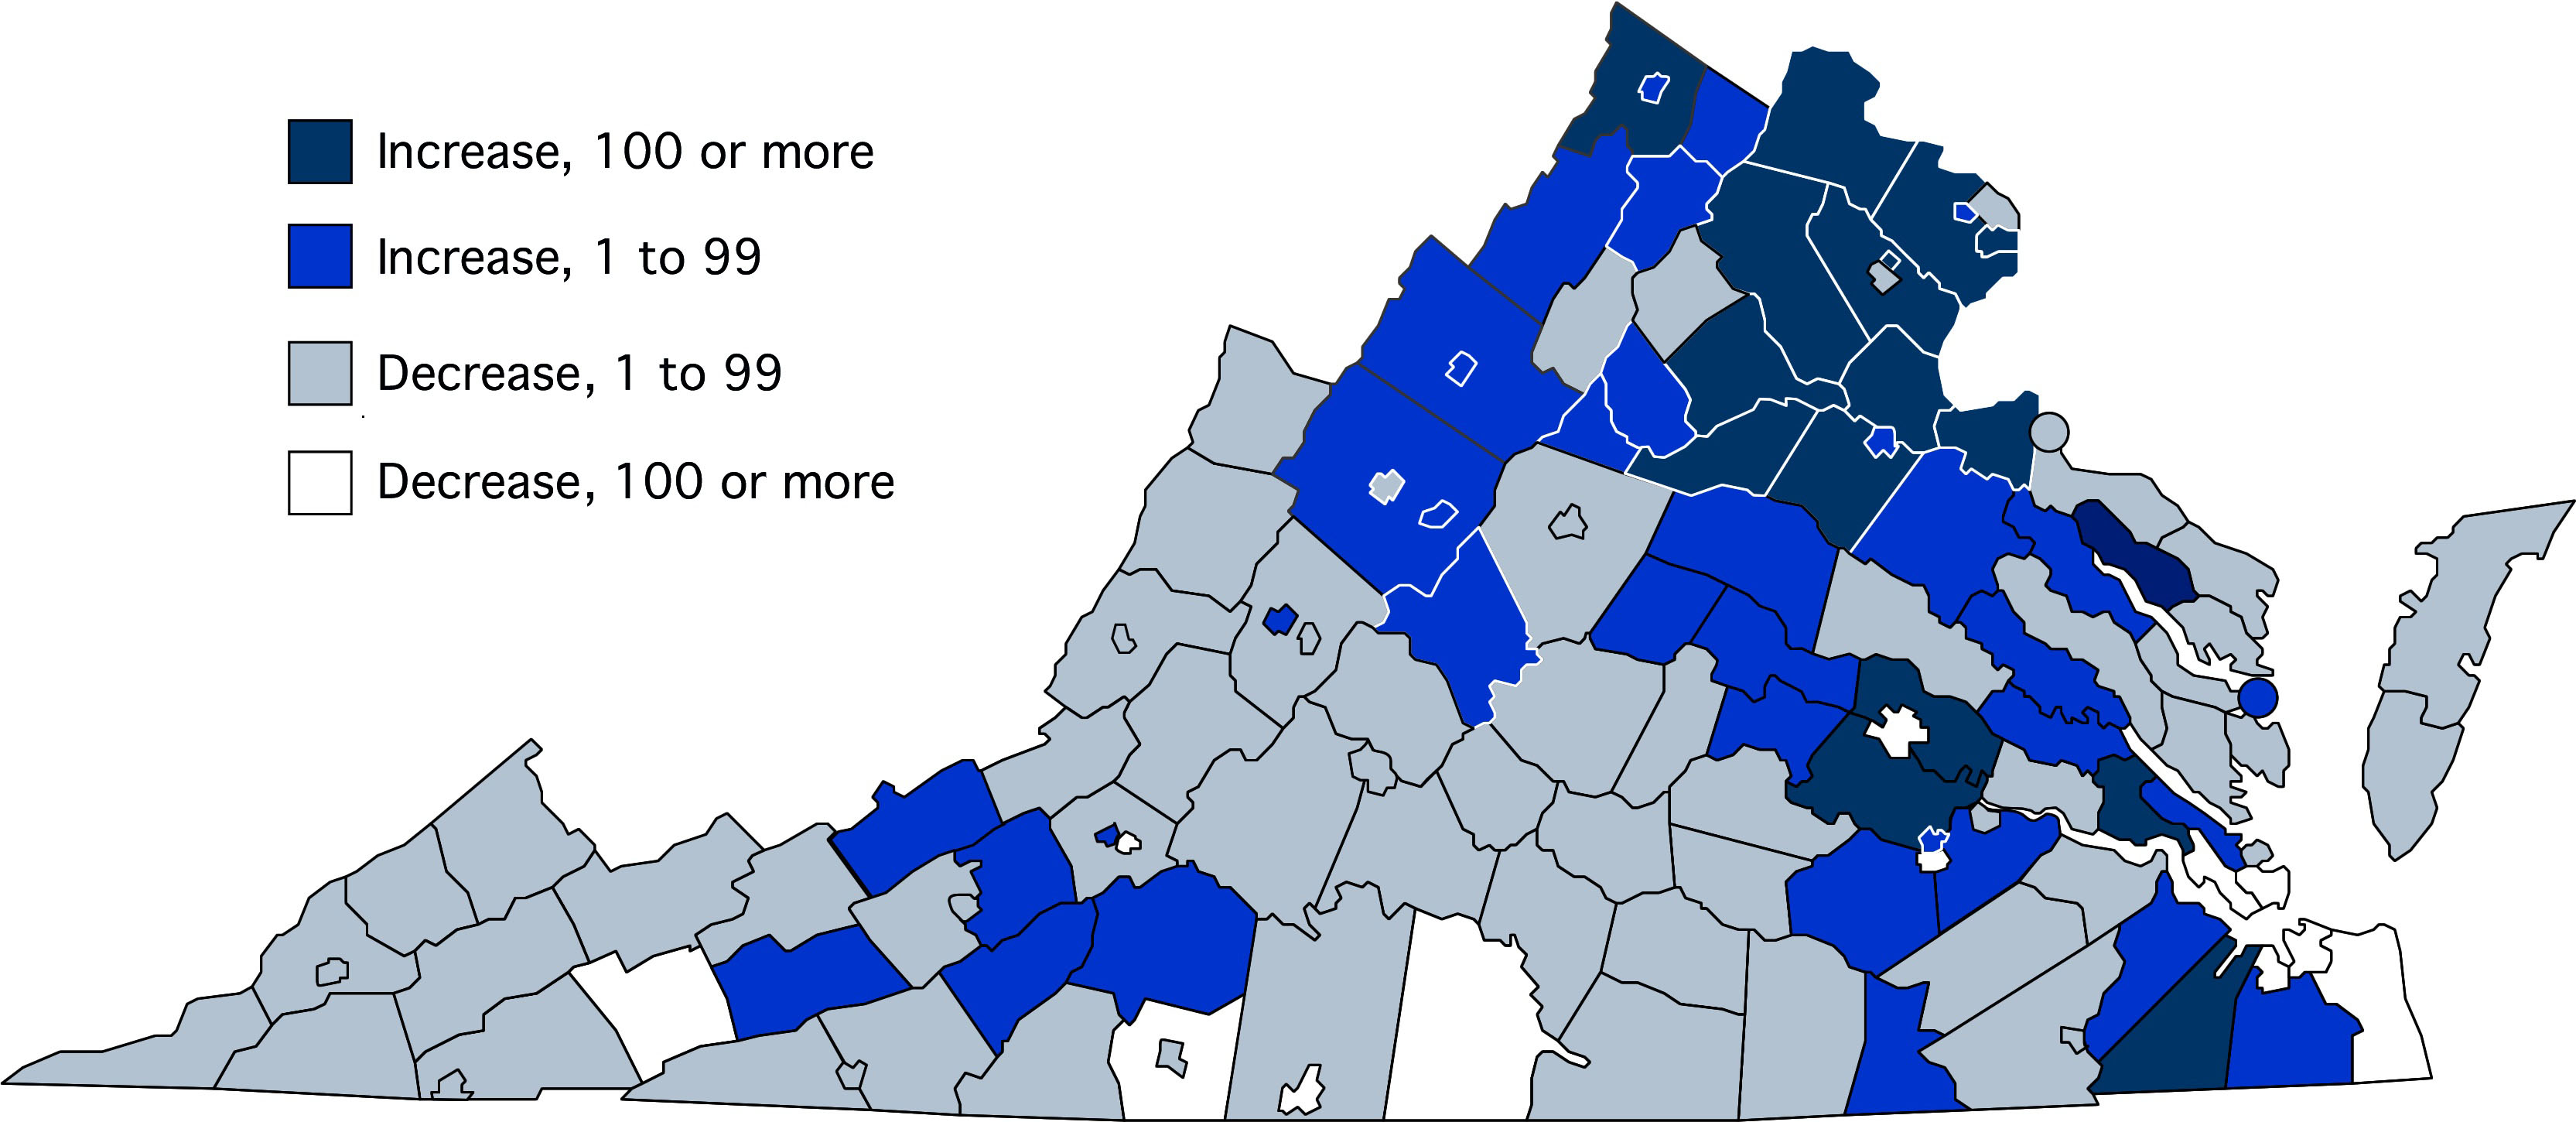 Map of Virginia in various shades of blue to show the increase in population